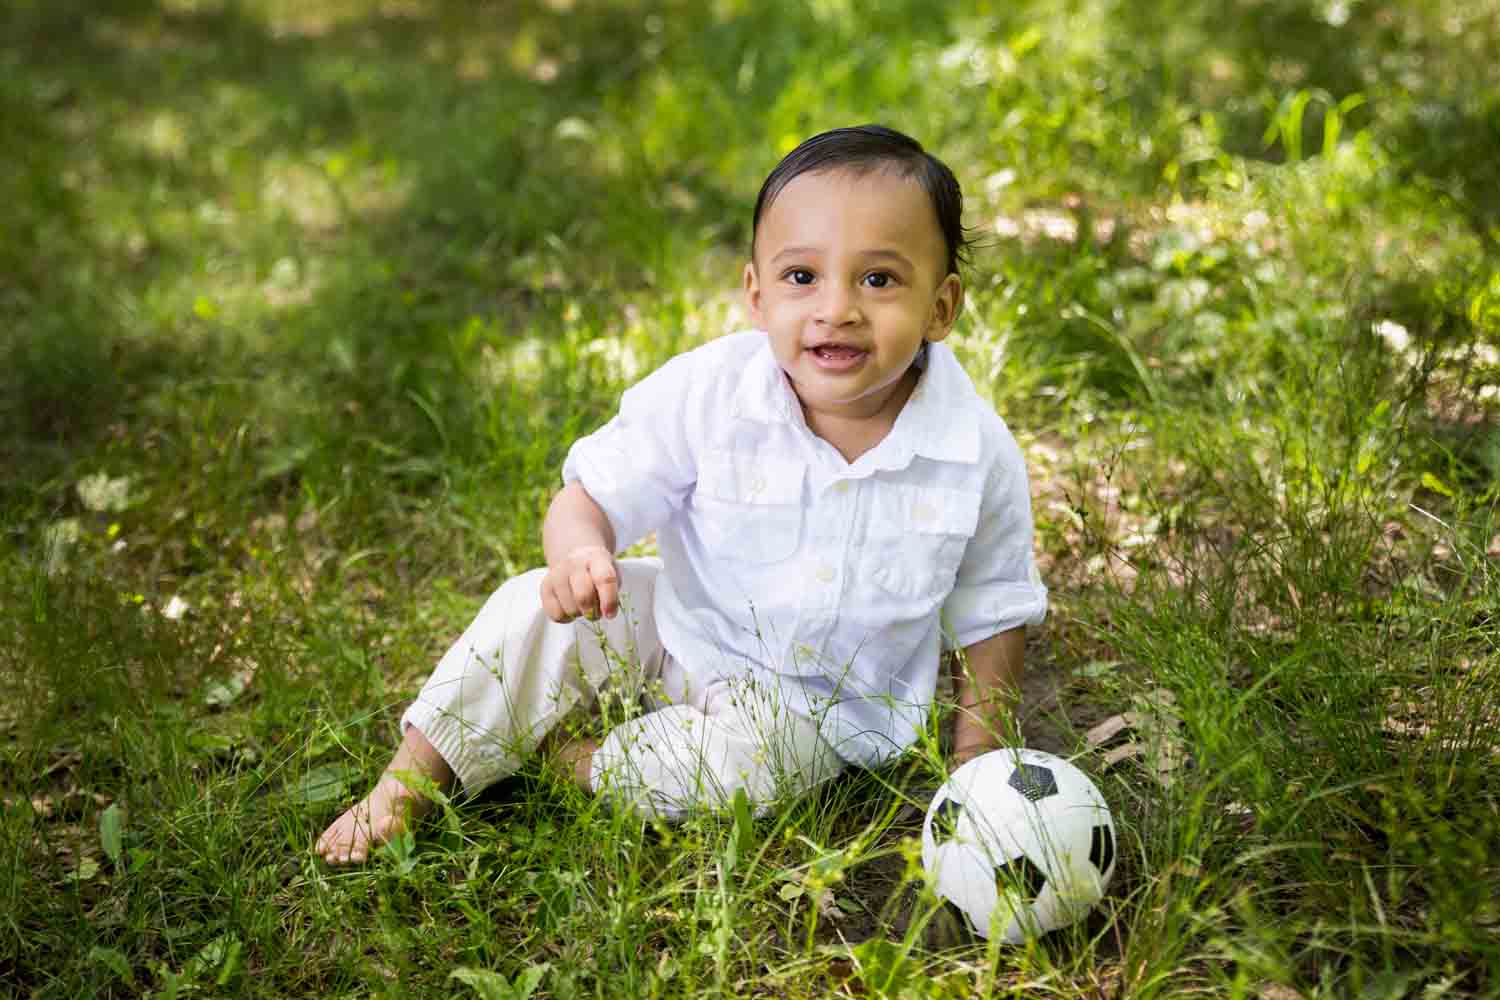 Forest Hills family portrait of toddler sitting in grass with soccer ball